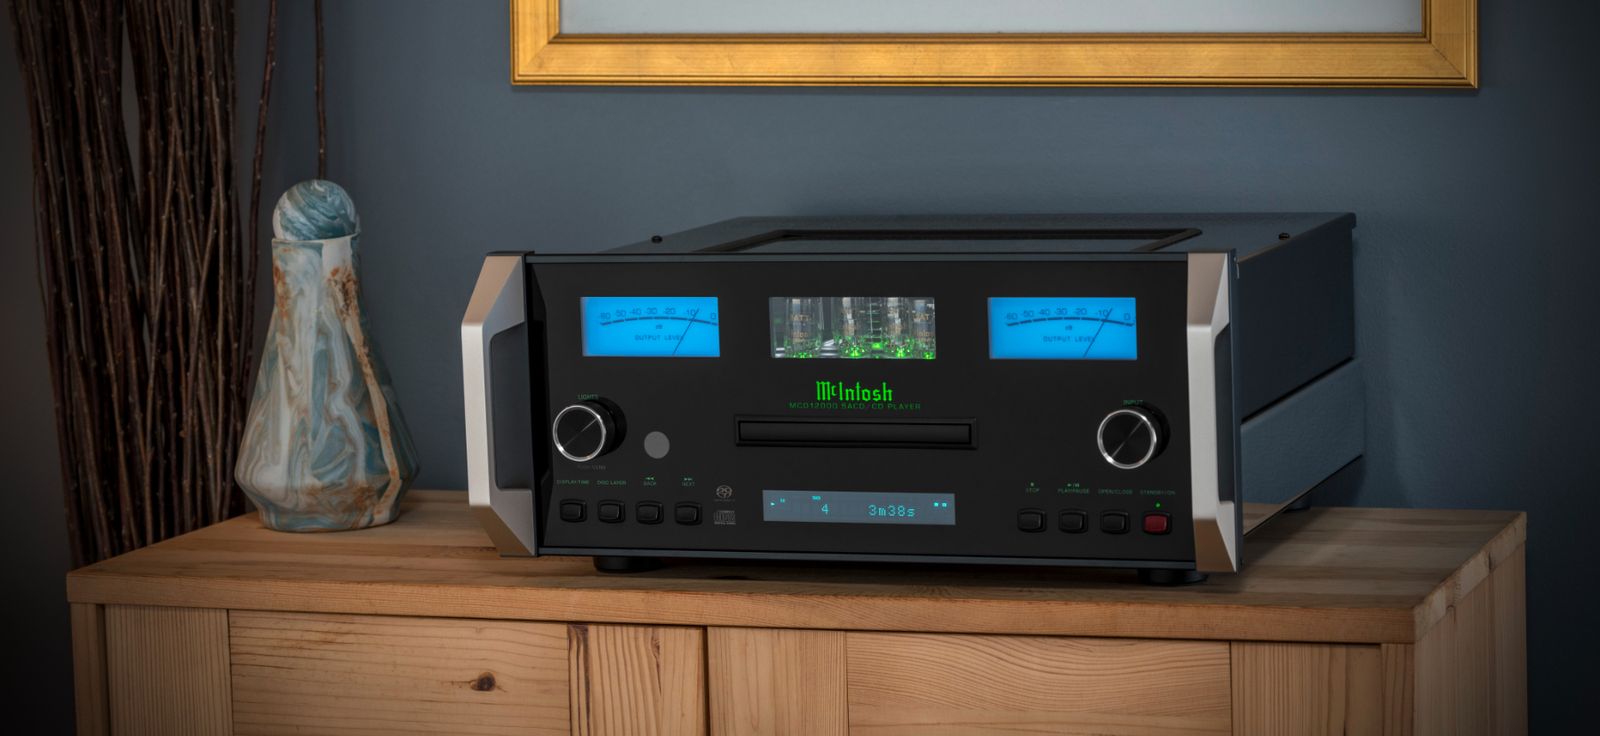 McIntosh has unveiled a new flagship SACD/CD player, the mighty MCD12000